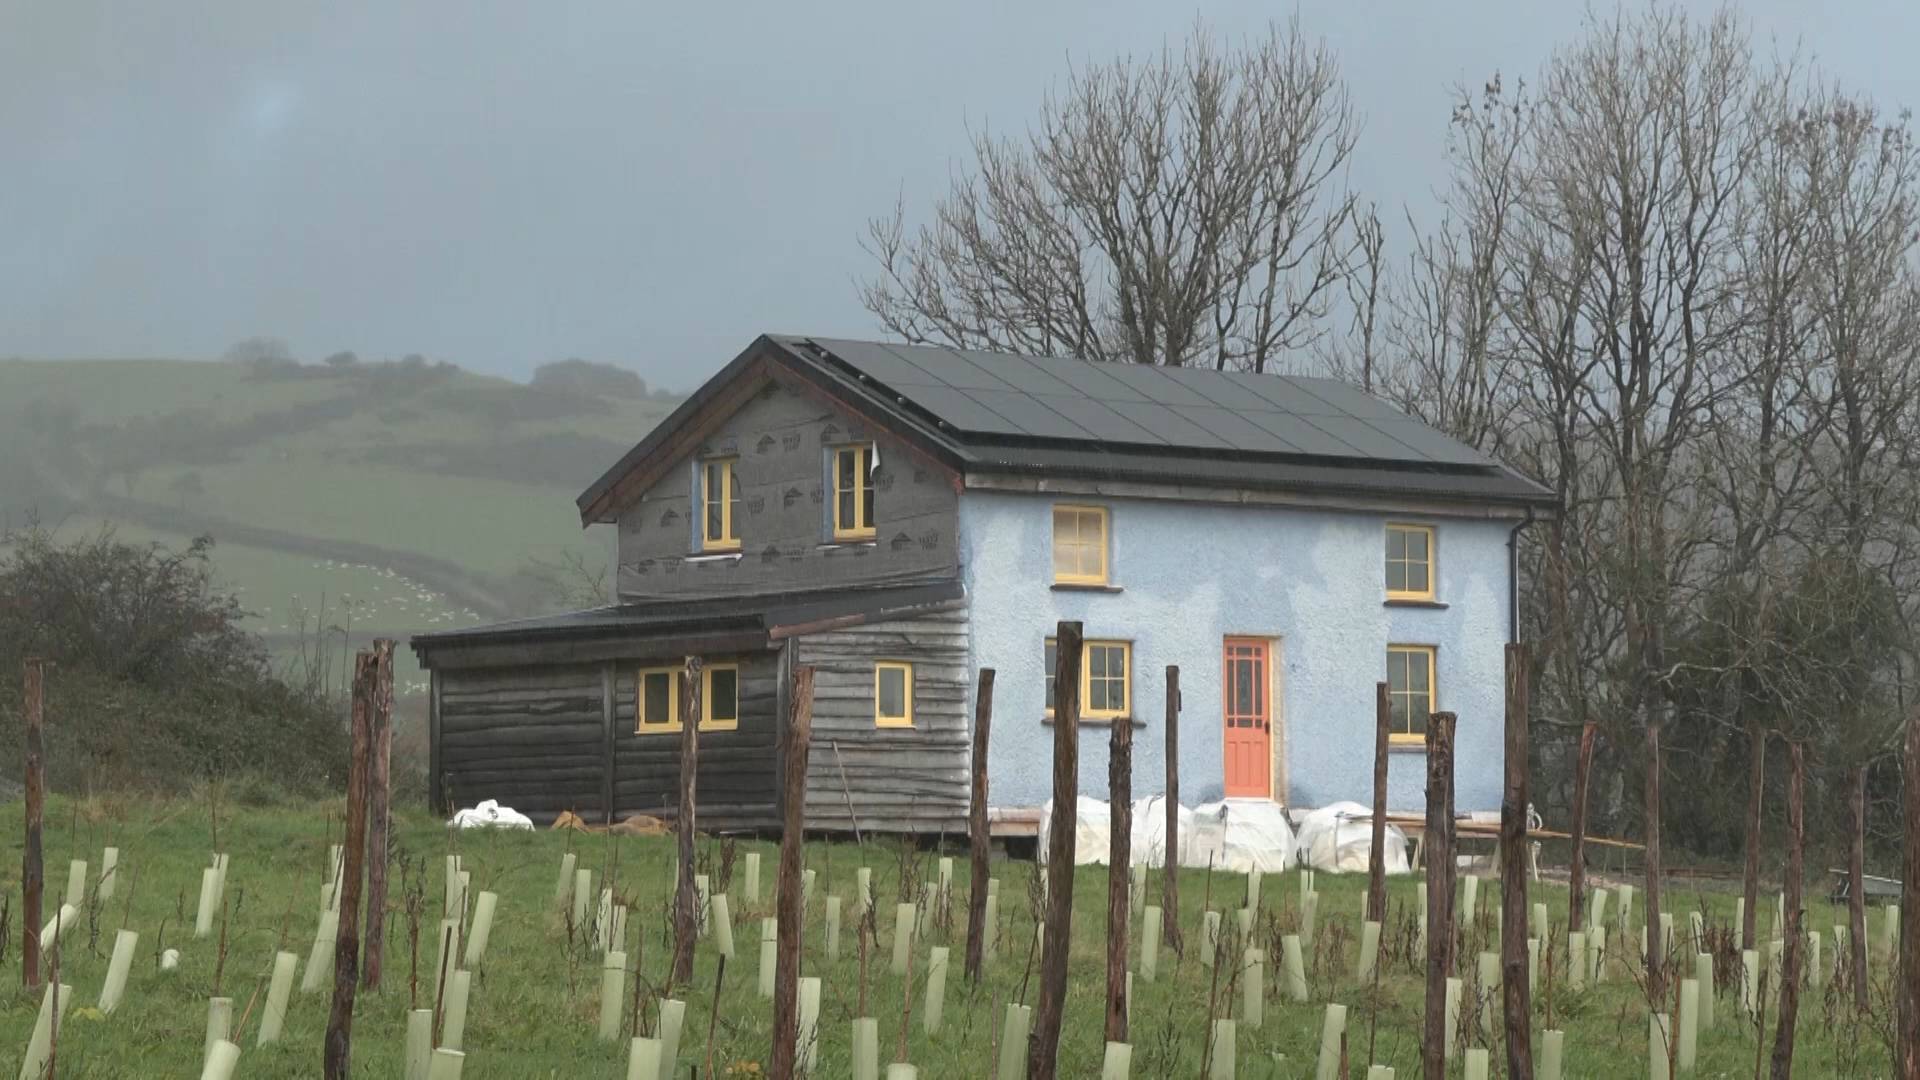 The Welsh government is giving permission for construction of homes in rural Wales so long as they are zero carbon in construction and use. /CGTN Europe